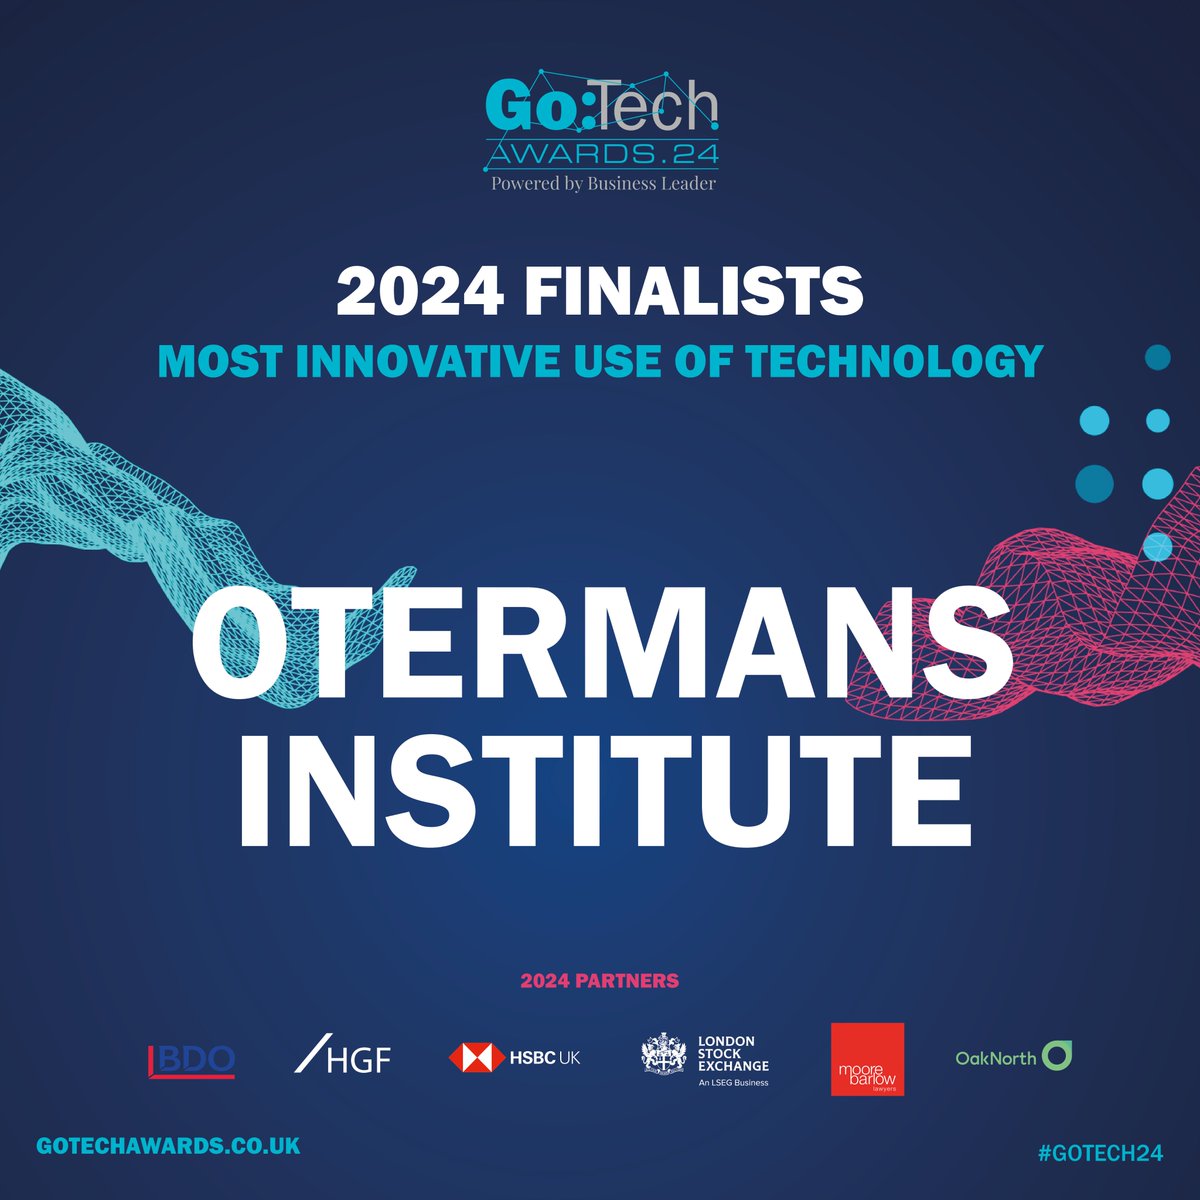 Yesterday, we celebrated being finalists in the 'Ed Tech Business of the Year' category. Today, we’re thrilled to add another recognition to our journey! #upskillingageneration #gotech24 #innovation #education